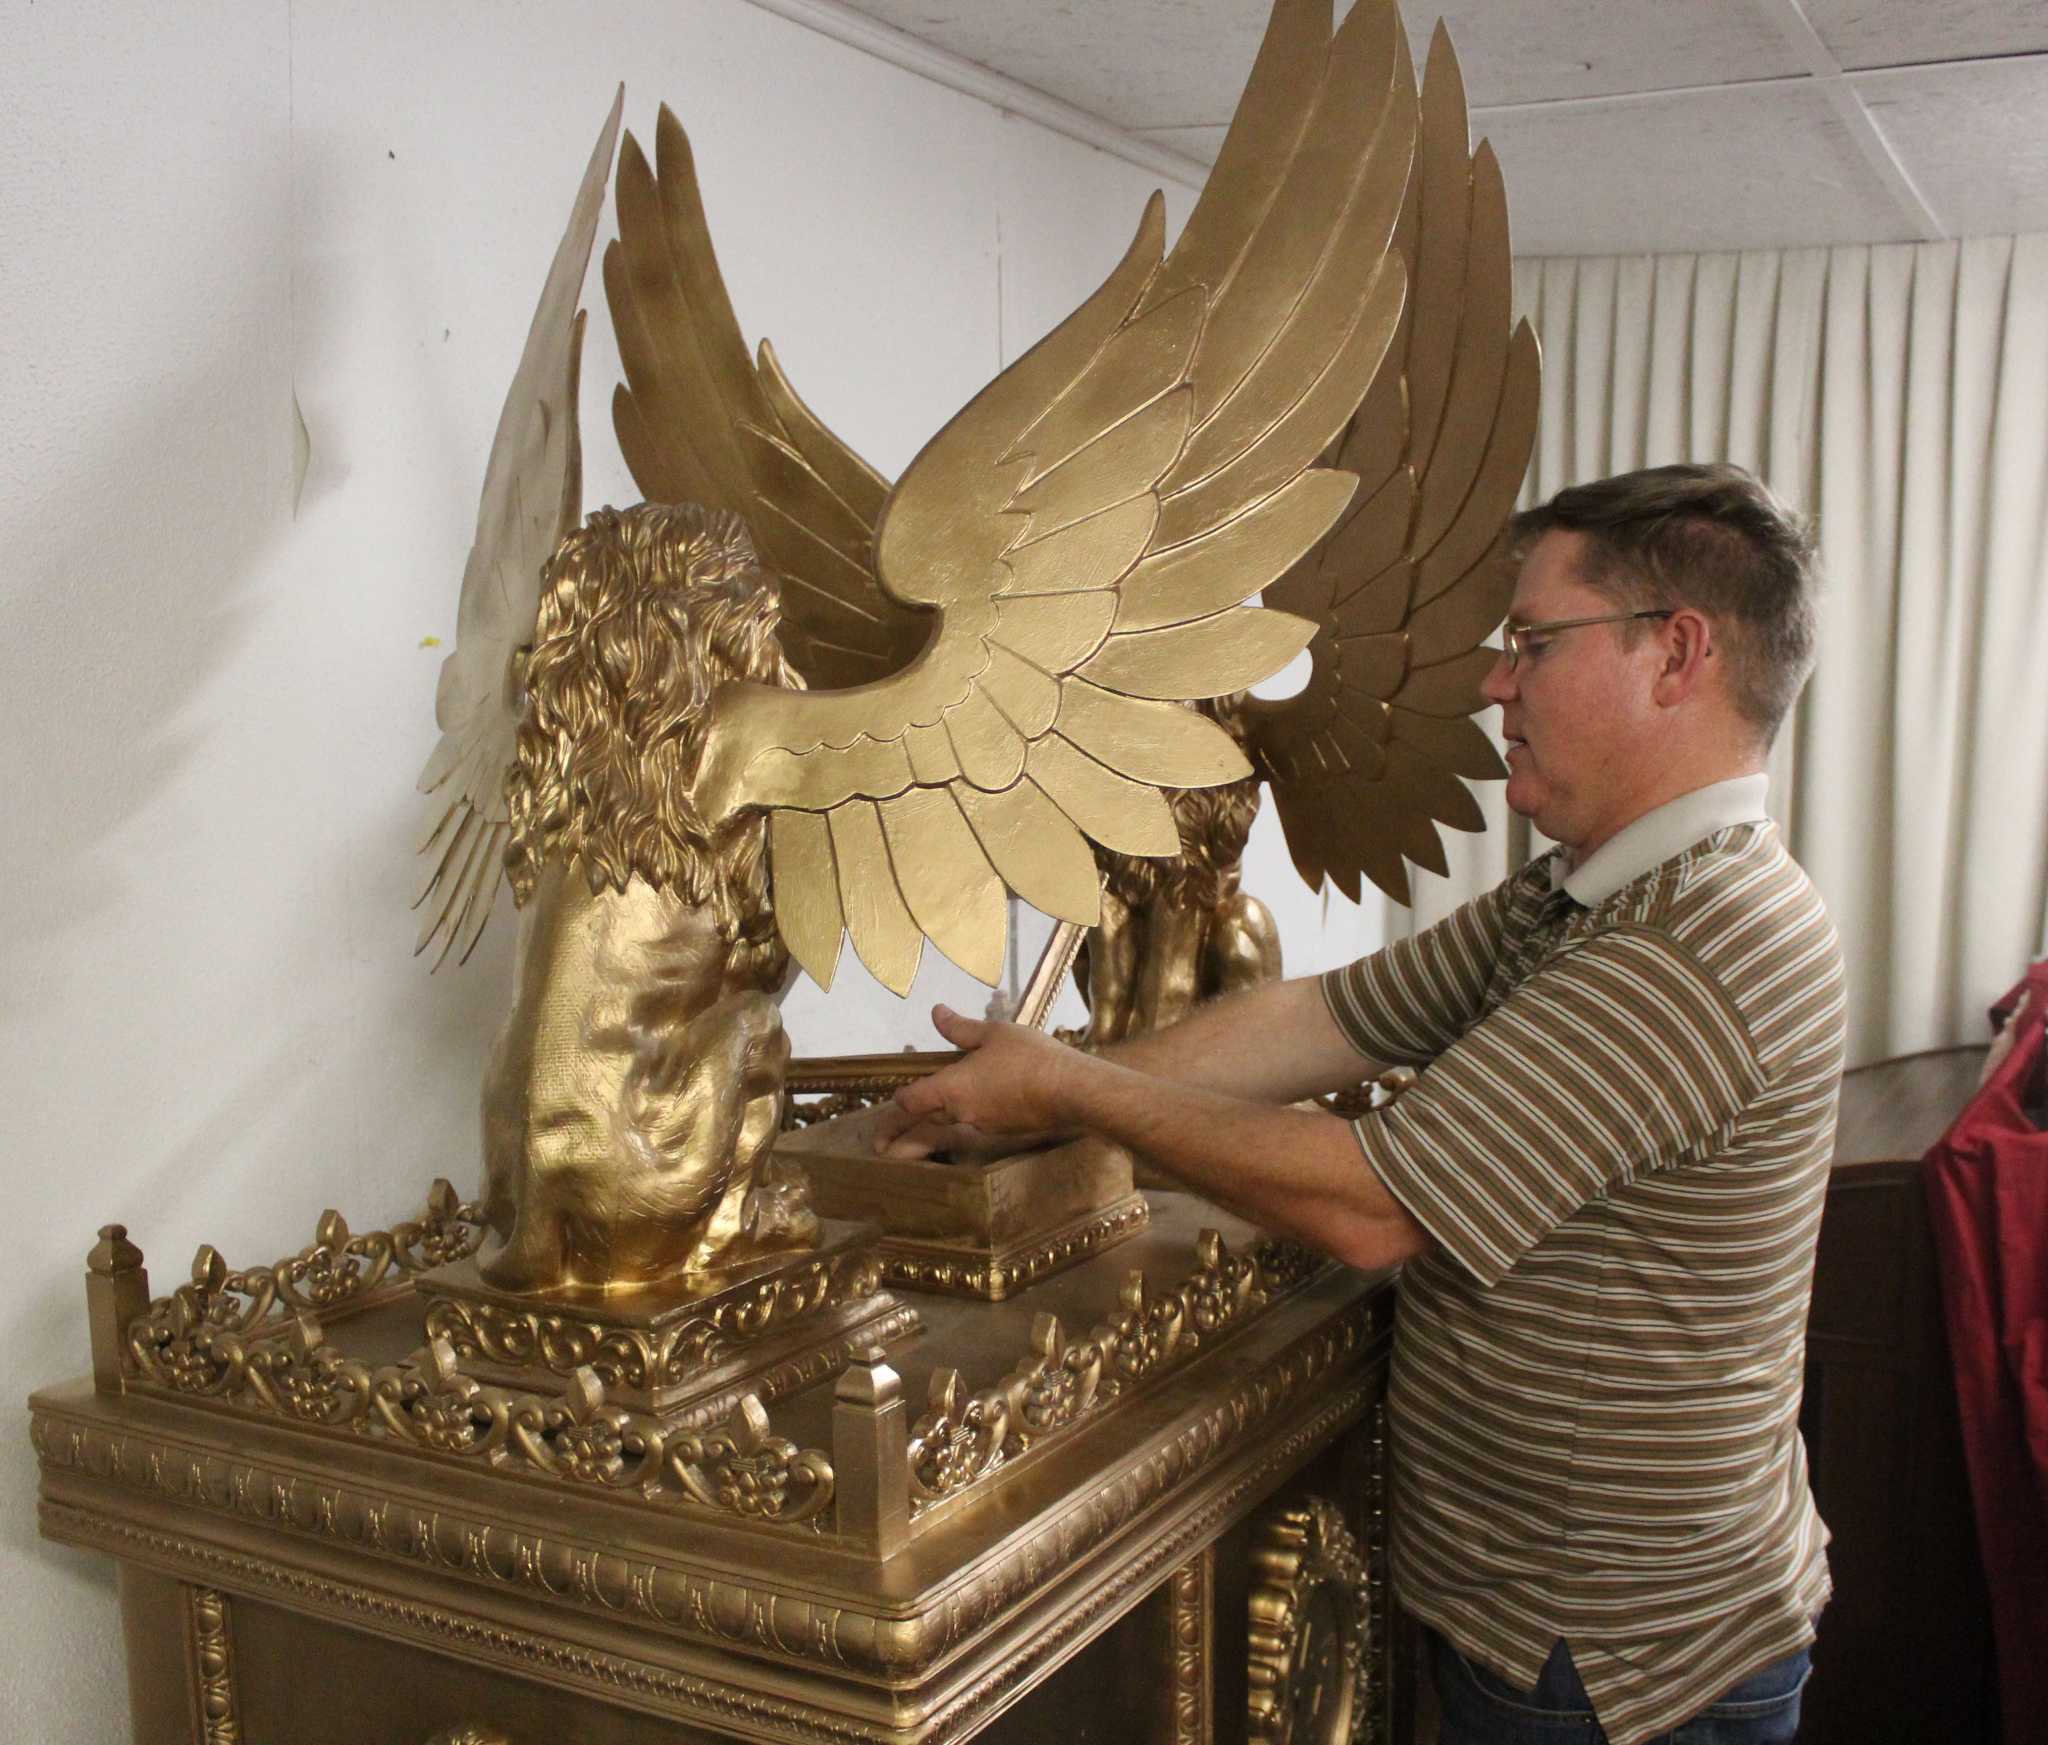 Cleveland church creates replica of Ark of the Covenant - Houston Chronicle2048 x 1745